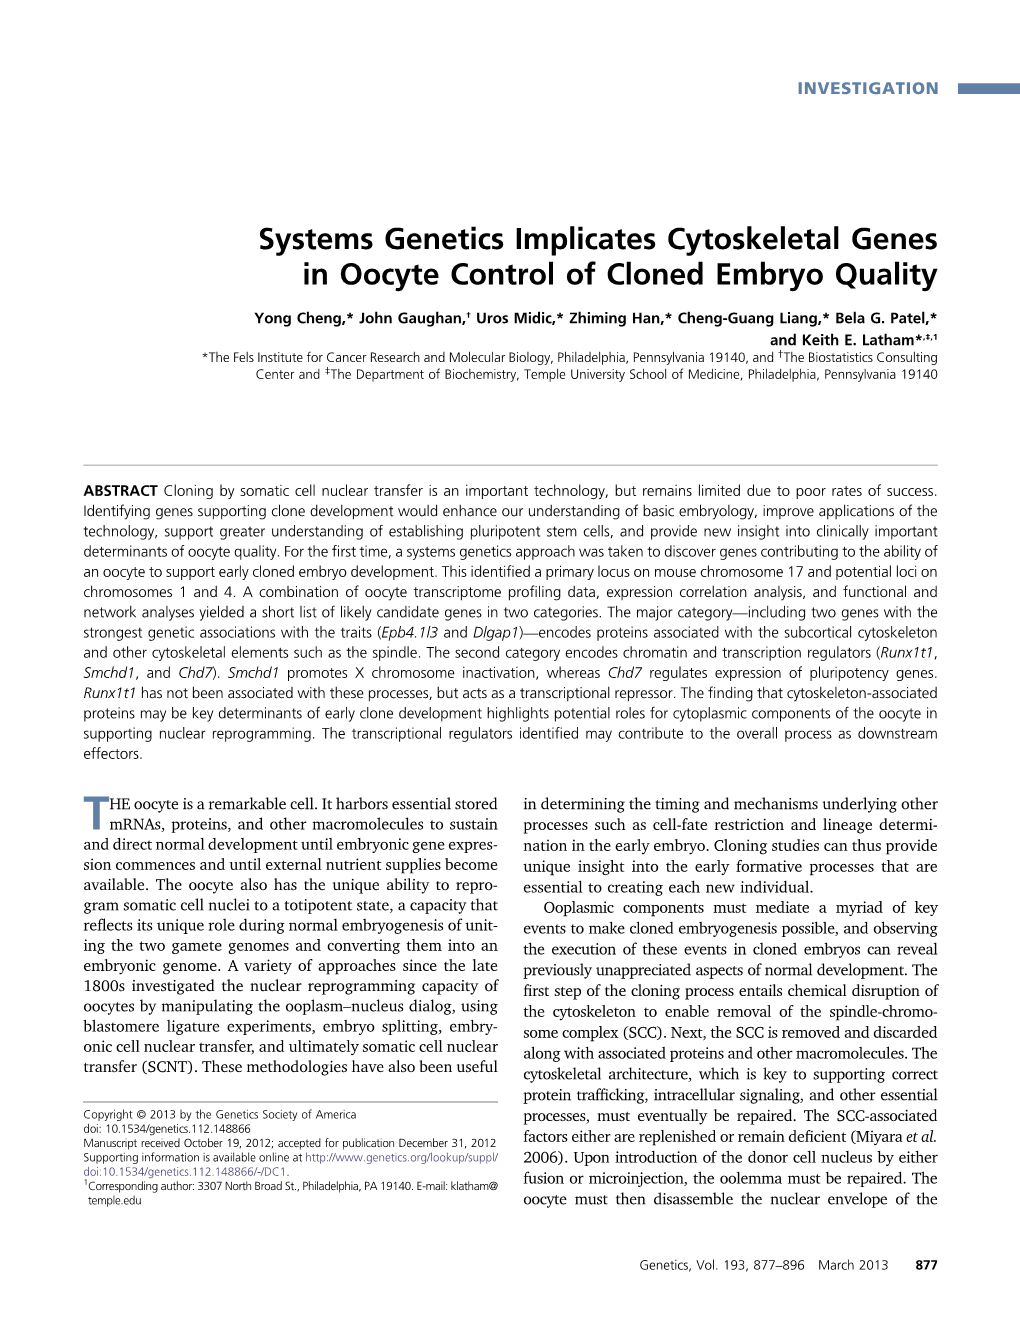 Systems Genetics Implicates Cytoskeletal Genes in Oocyte Control of Cloned Embryo Quality